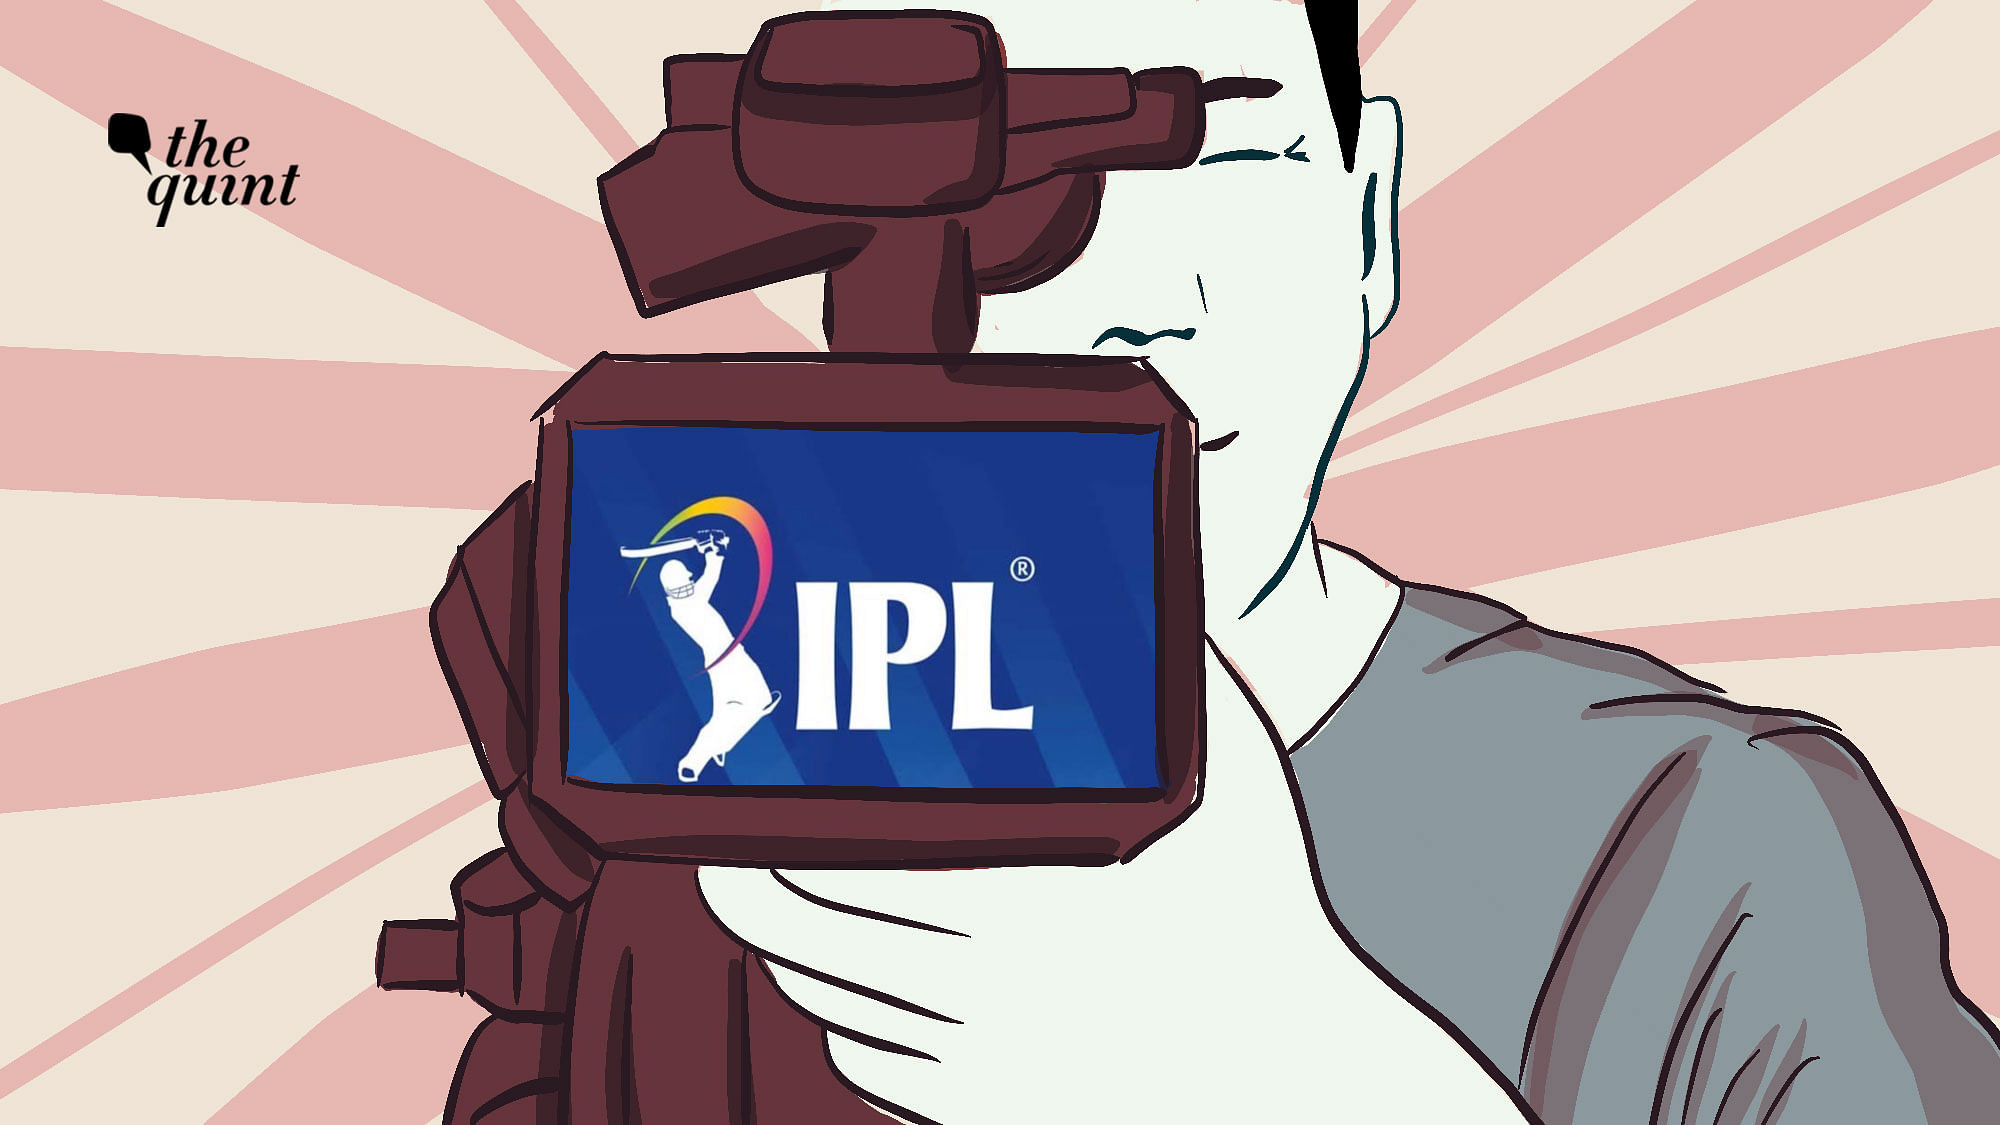 More than 500 people were involved in the production of IPL. Now, they are without any work.